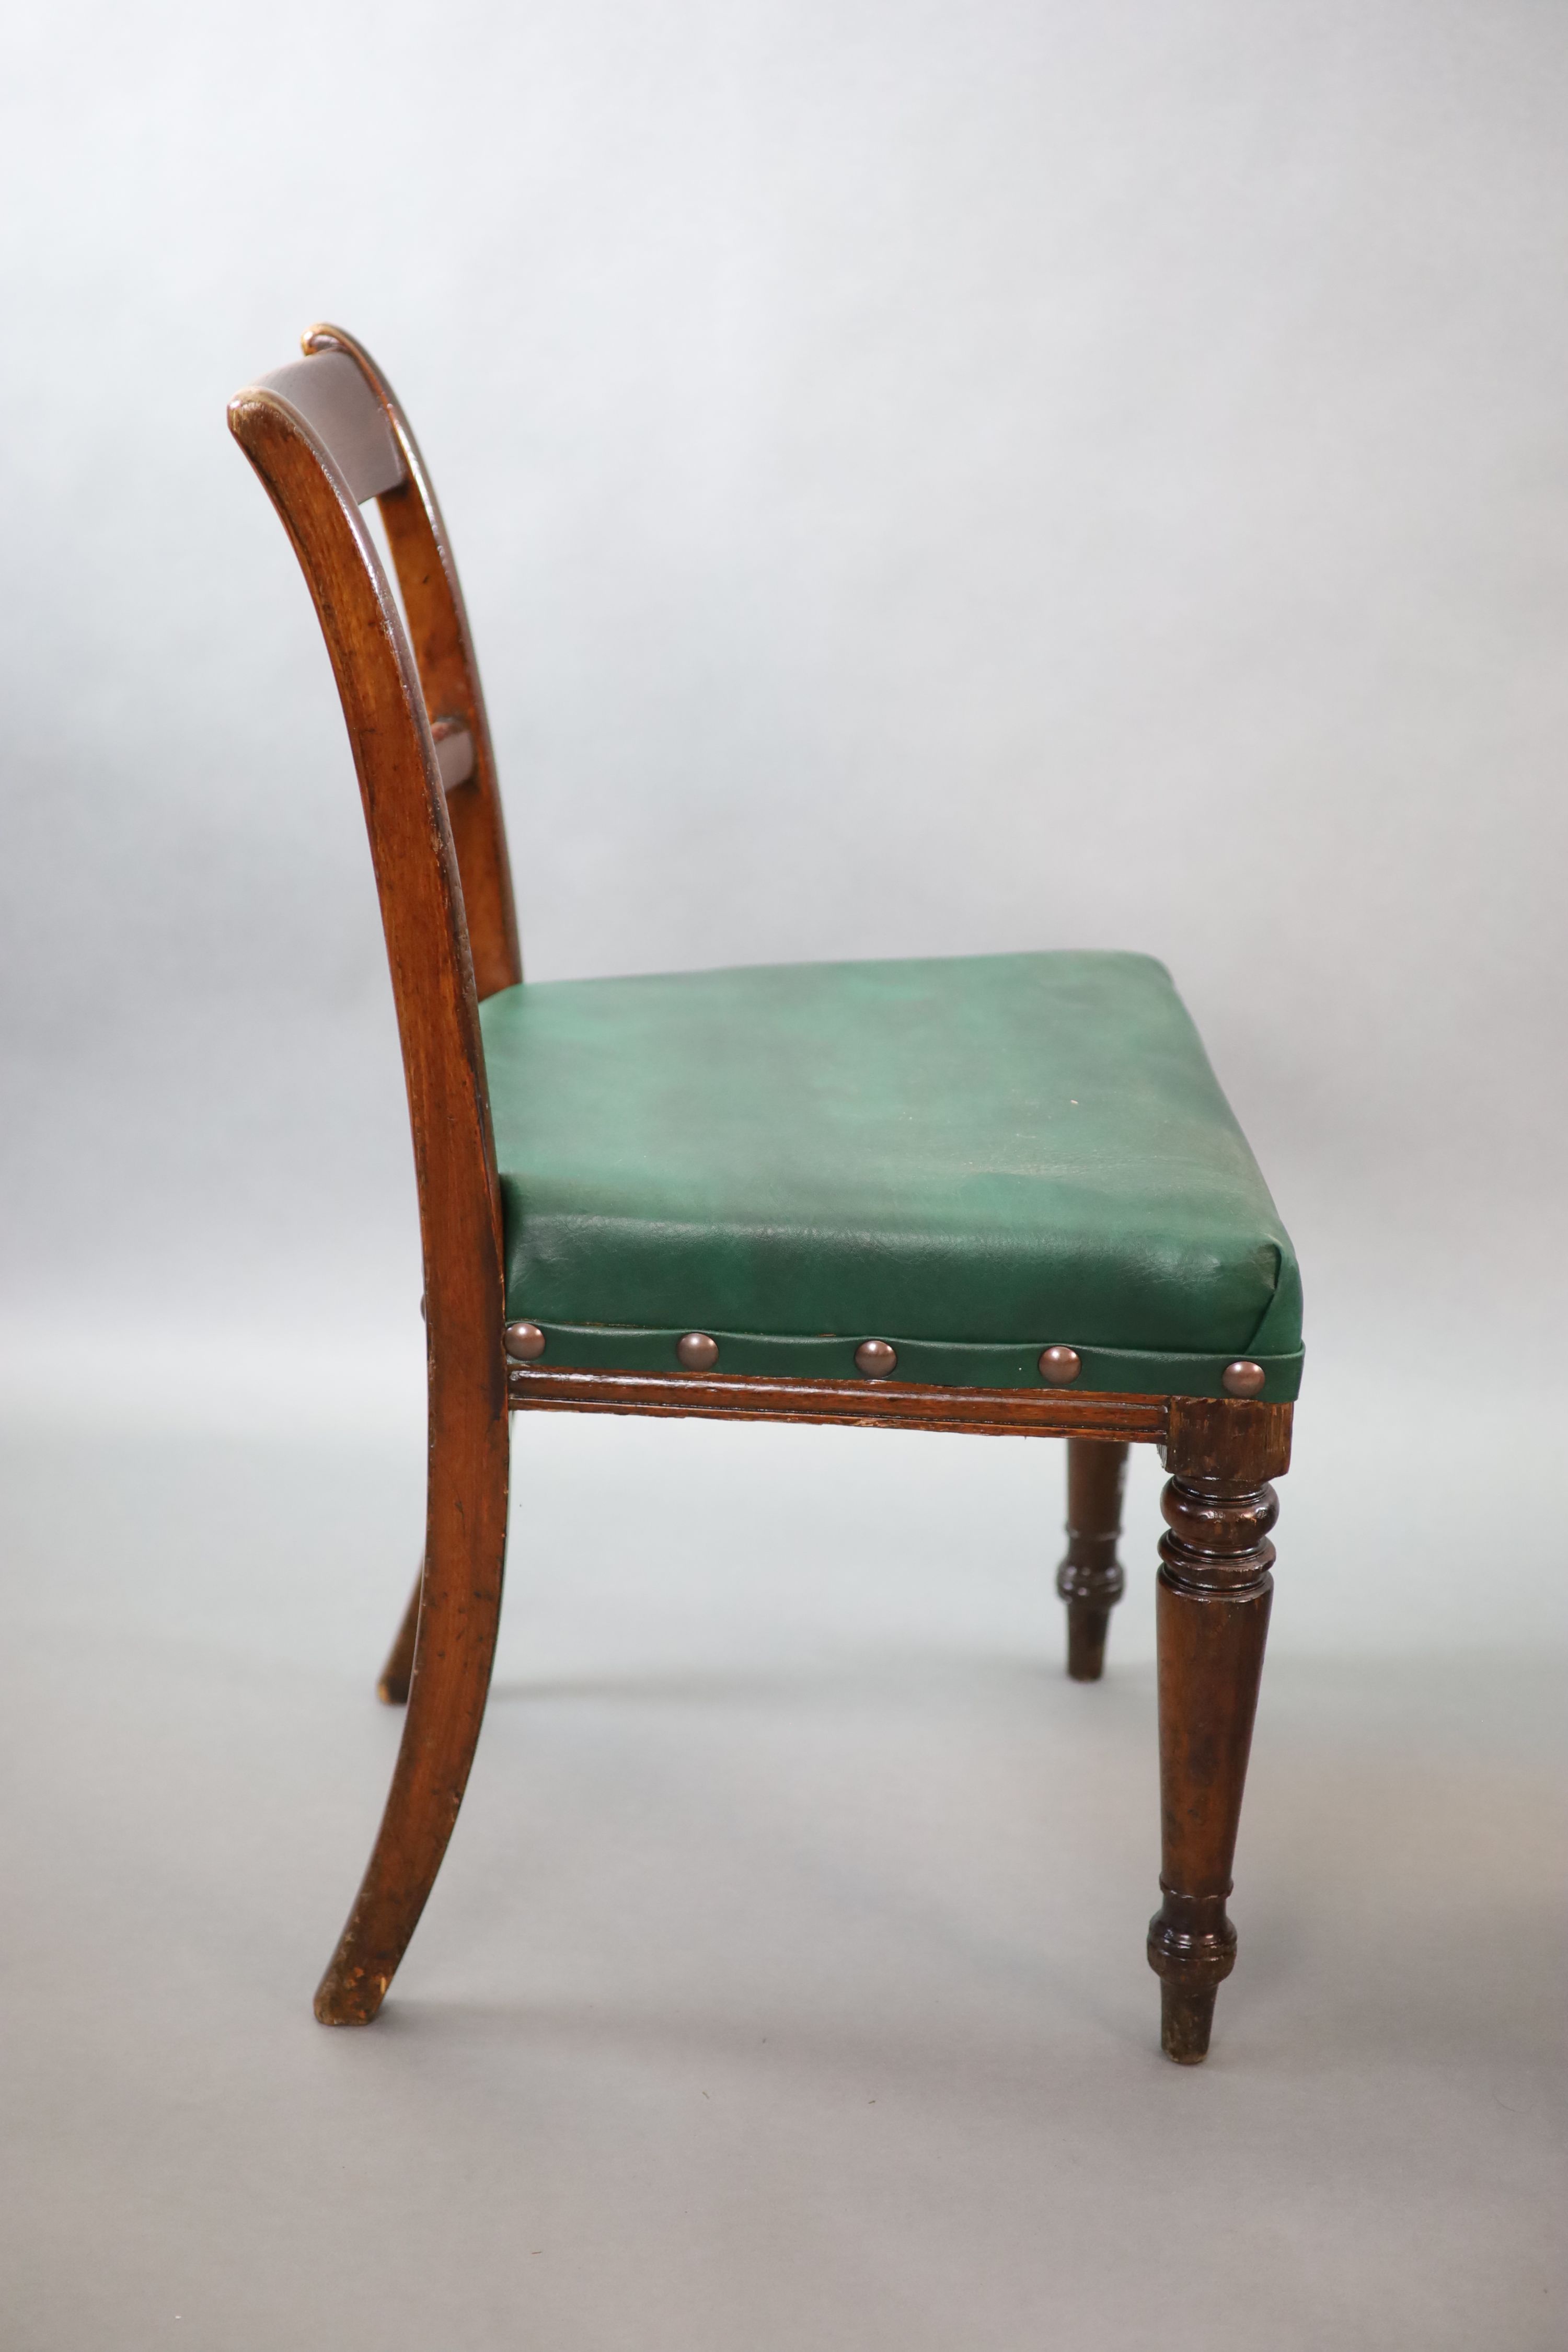 A set of ten early Victorian mahogany dining chairs